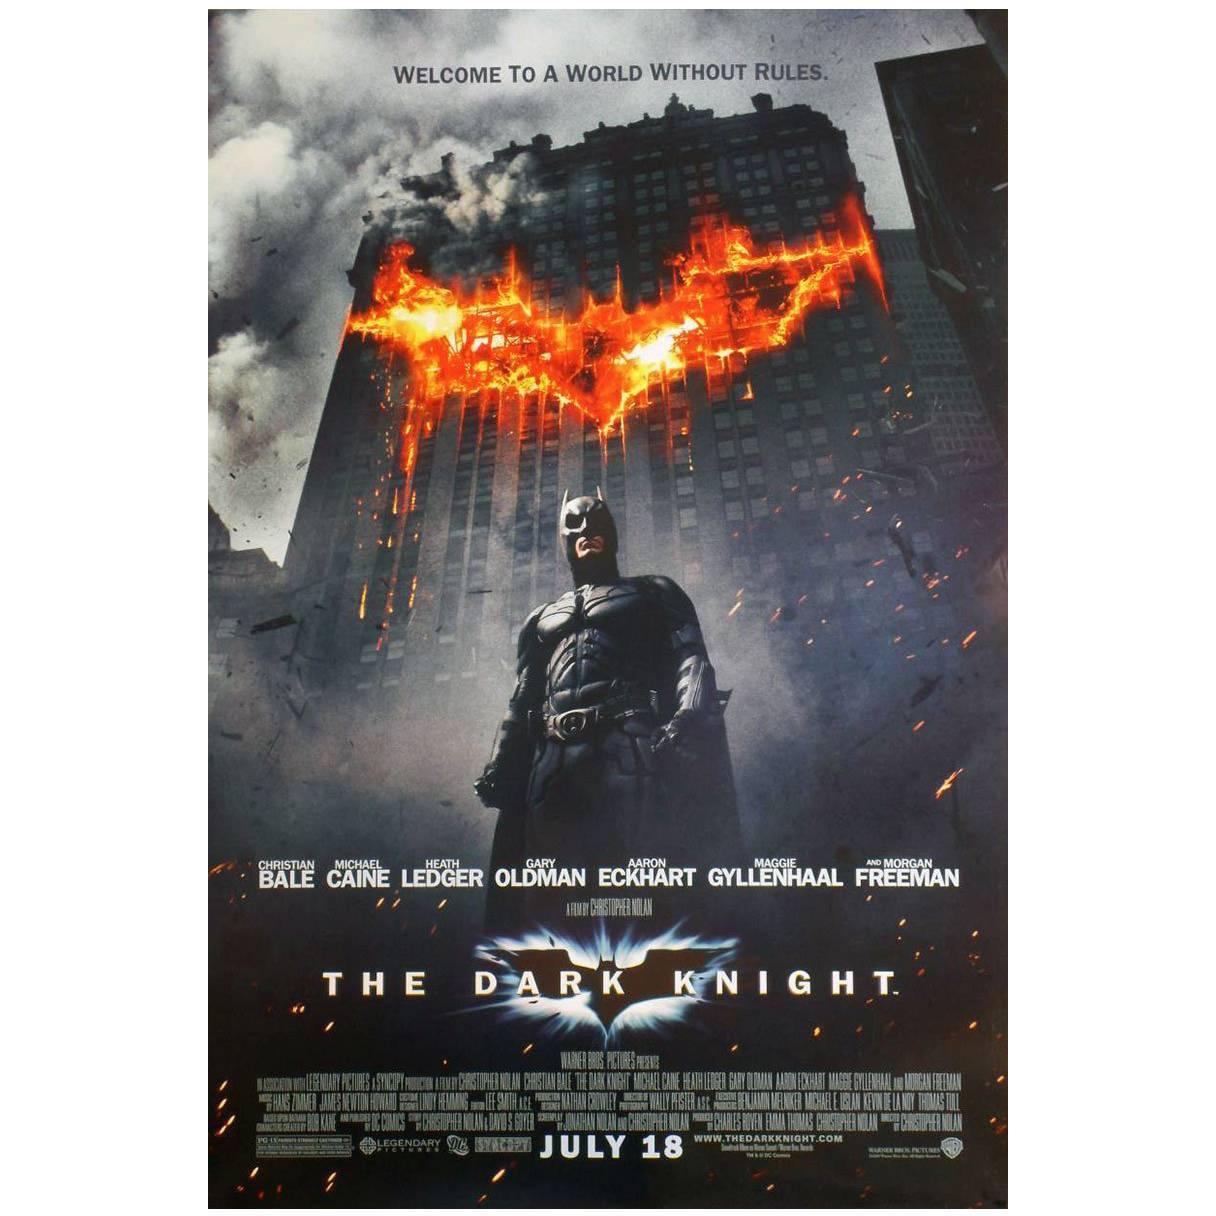 "The Dark Knight" Film Poster, 2008 For Sale